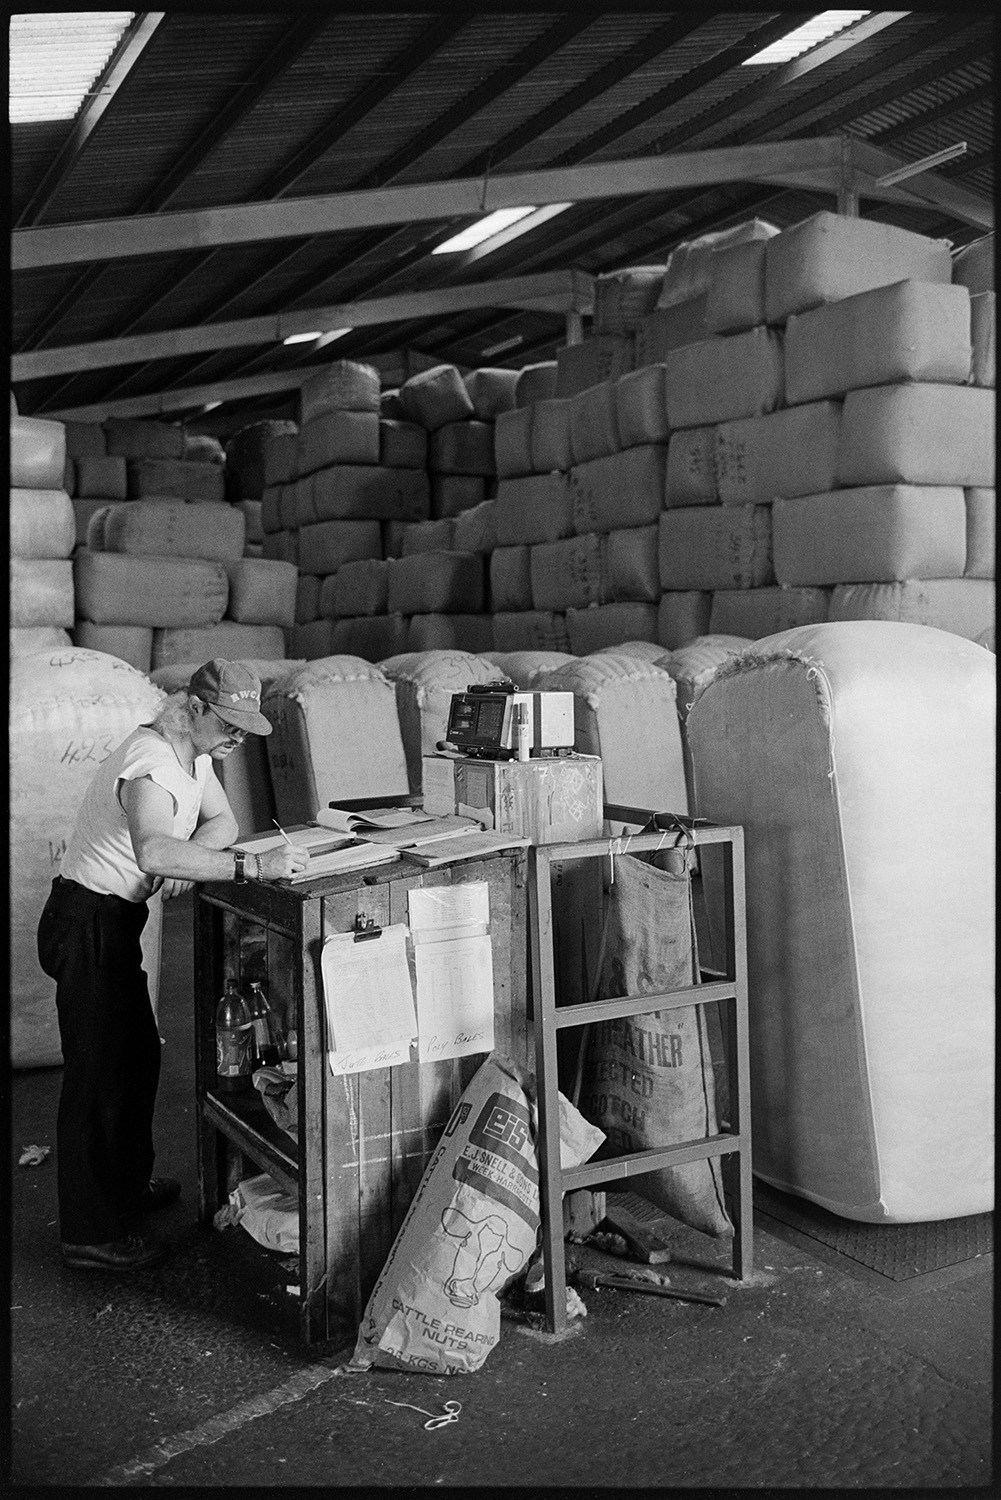 Sorting and packing wool, stacks of bales, office with paper work.
[A man recording information at a desk in the warehouse of Devon & Cornwall Wools Ltd at the Pathfields Business Park in South Molton. He is surrounded by stacked bales of wool.]